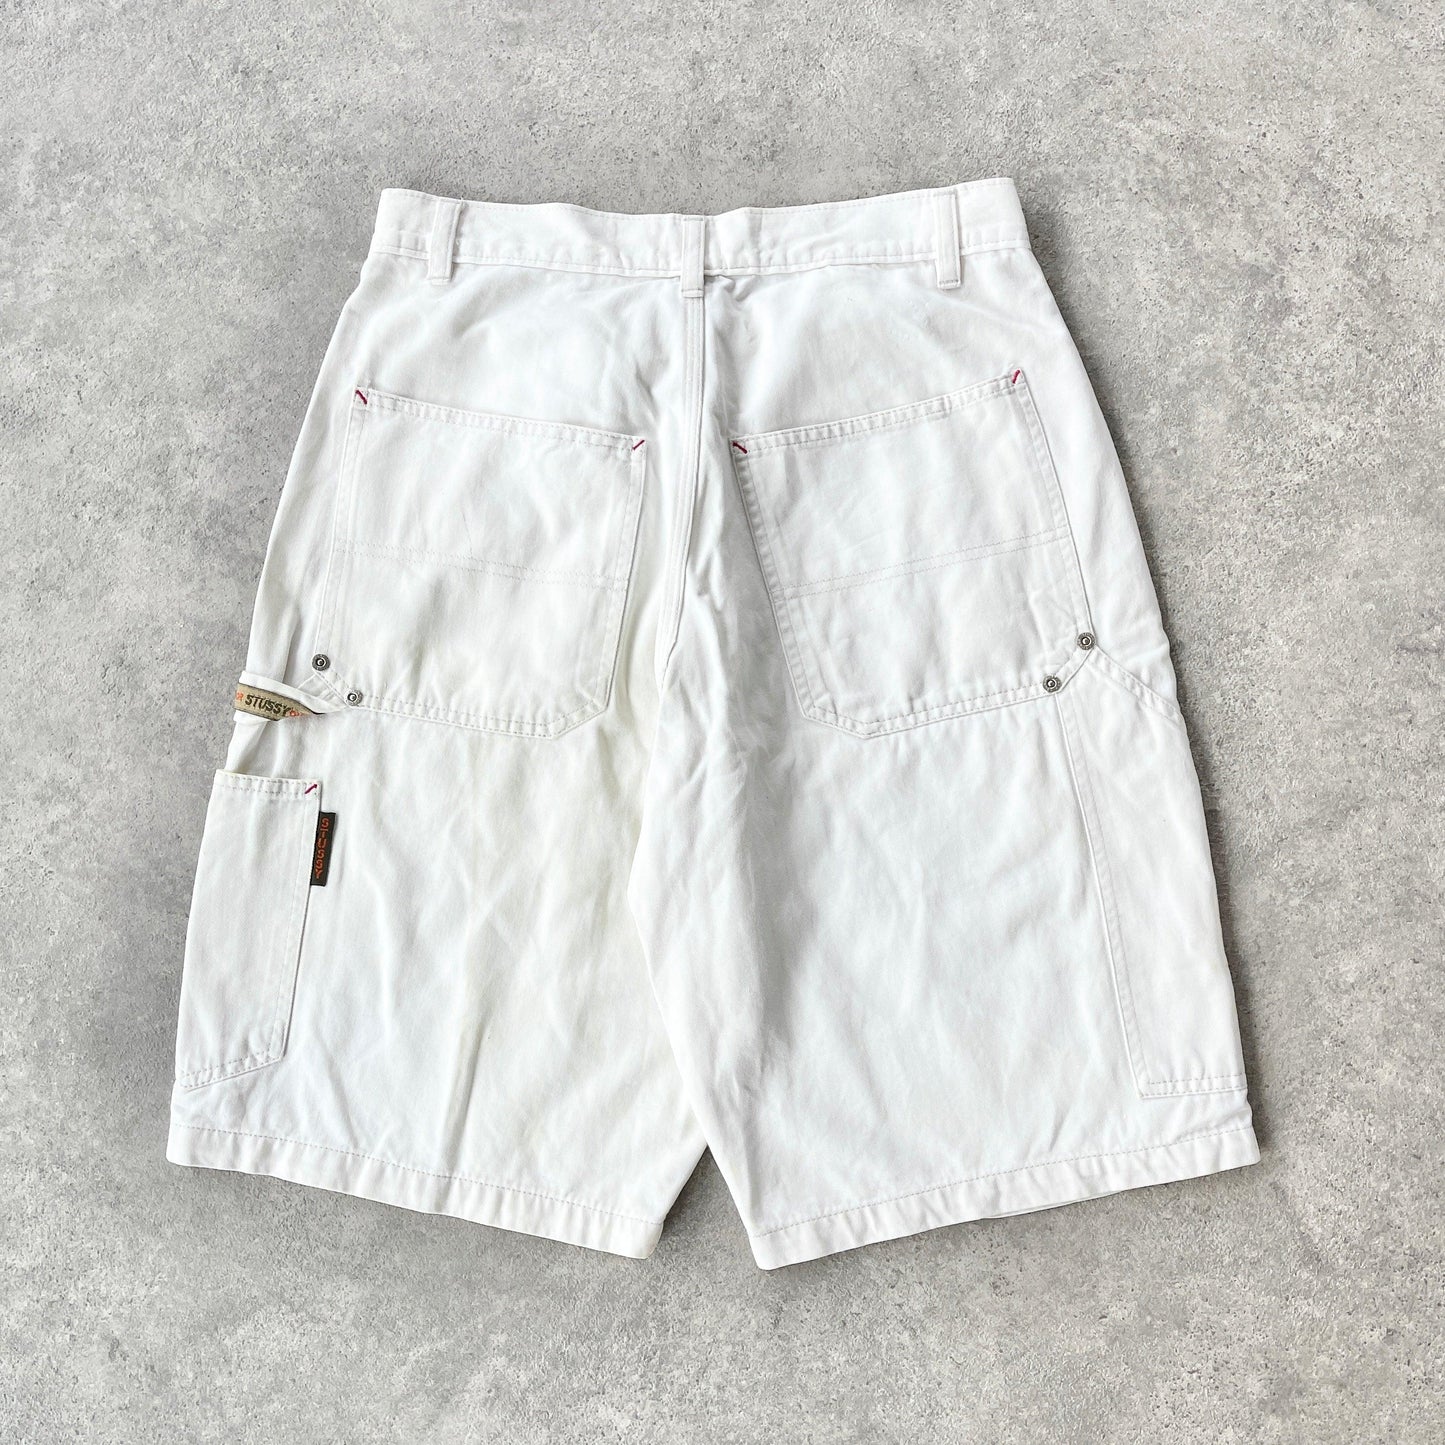 Stussy Outdoor 1990s script spellout jorts (30”) - Known Source